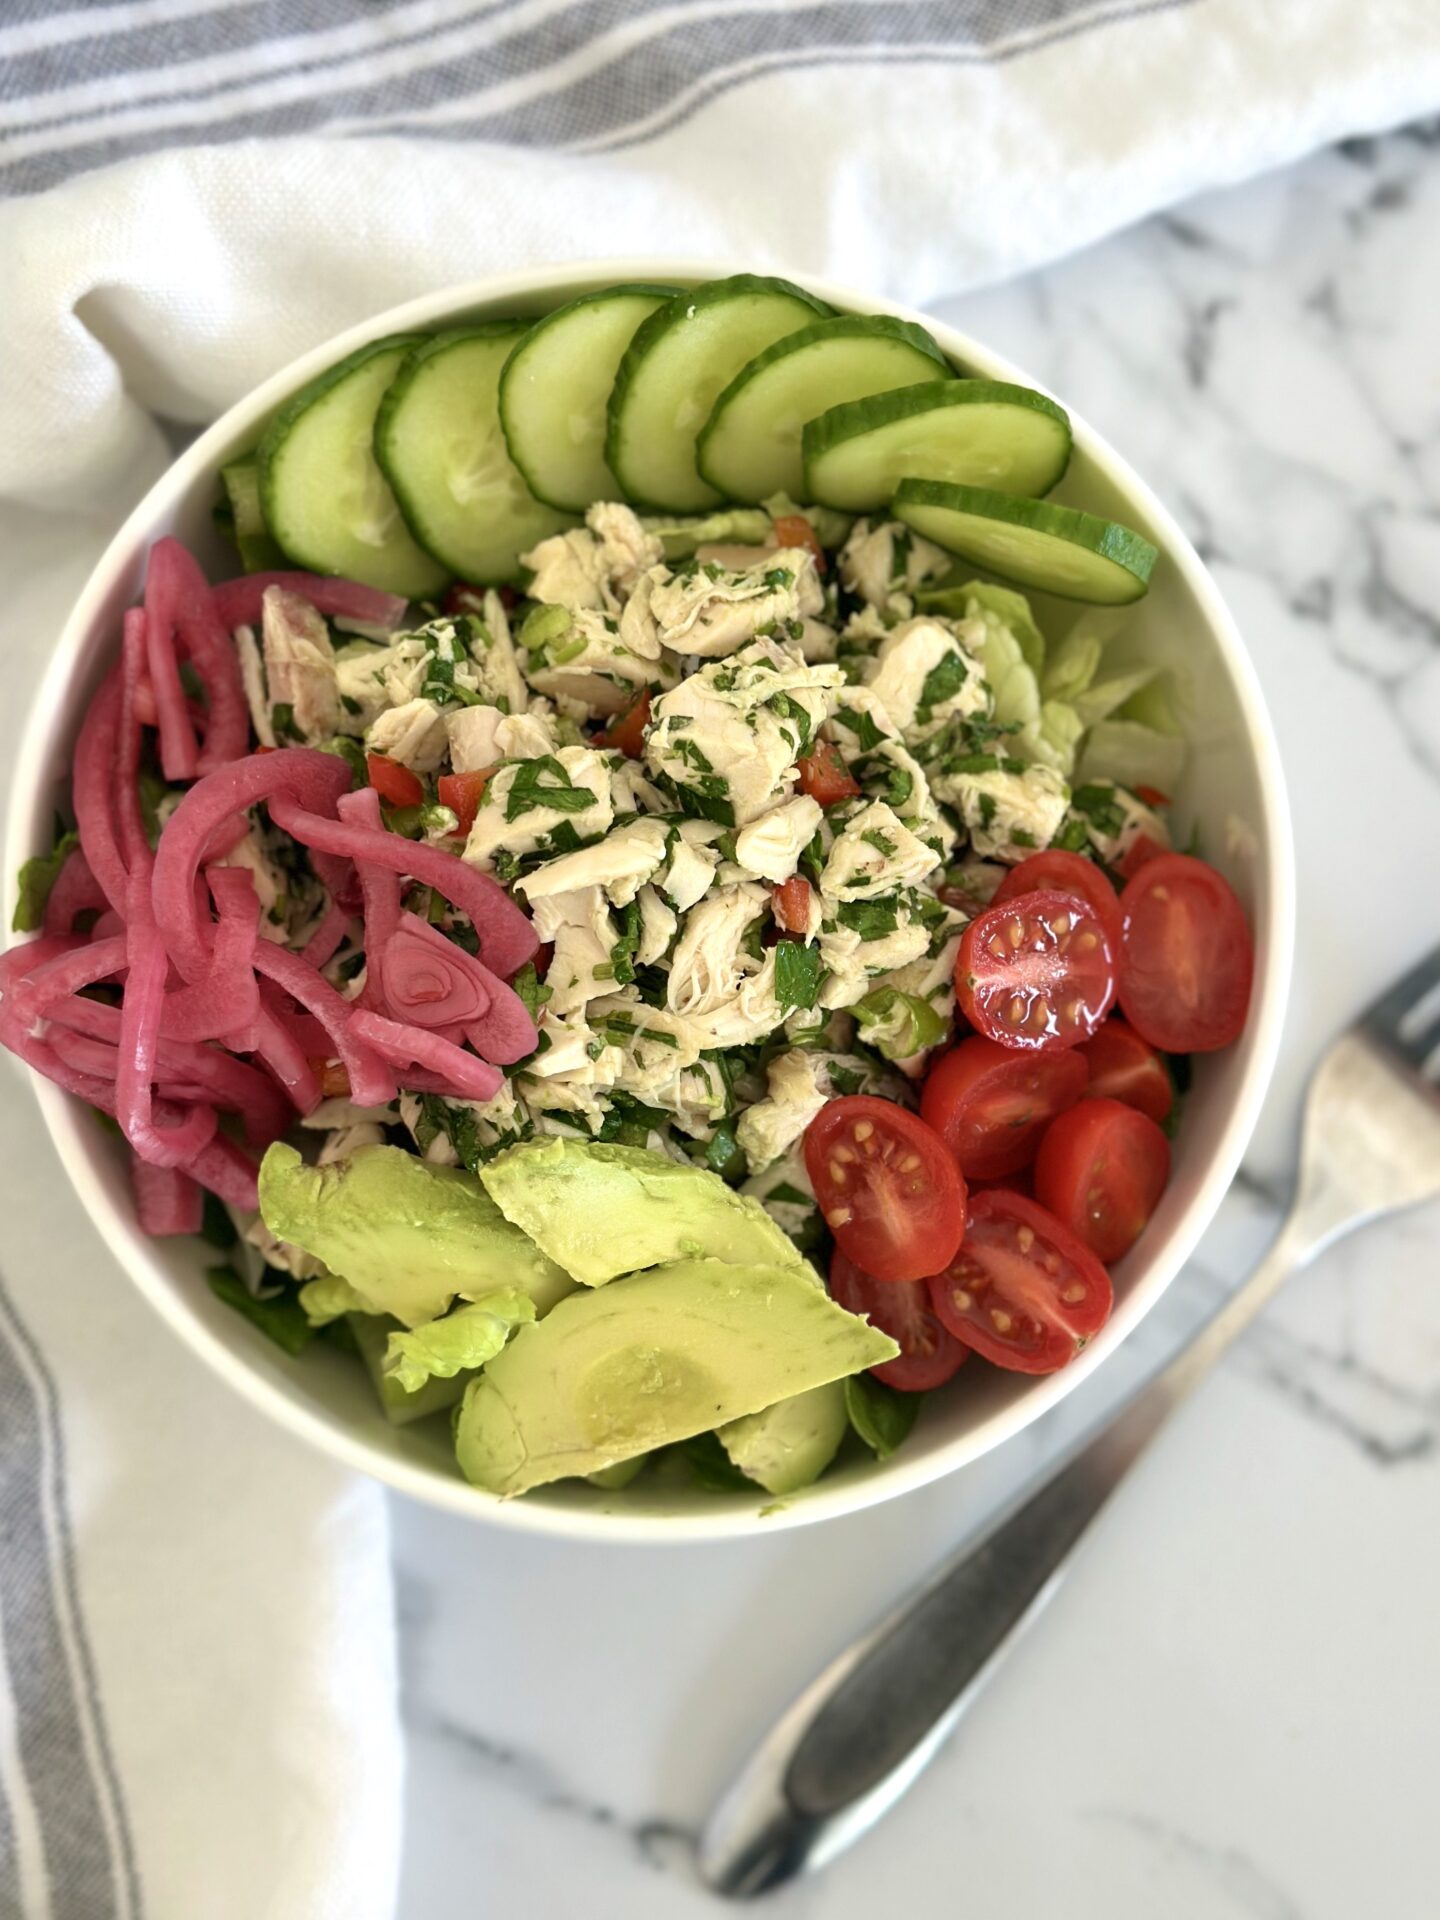 A green salad is topped with mounds of cherry tomatoes, avocado, cucumber, pickled red onion and a large scoop of chimichurri chicken salad